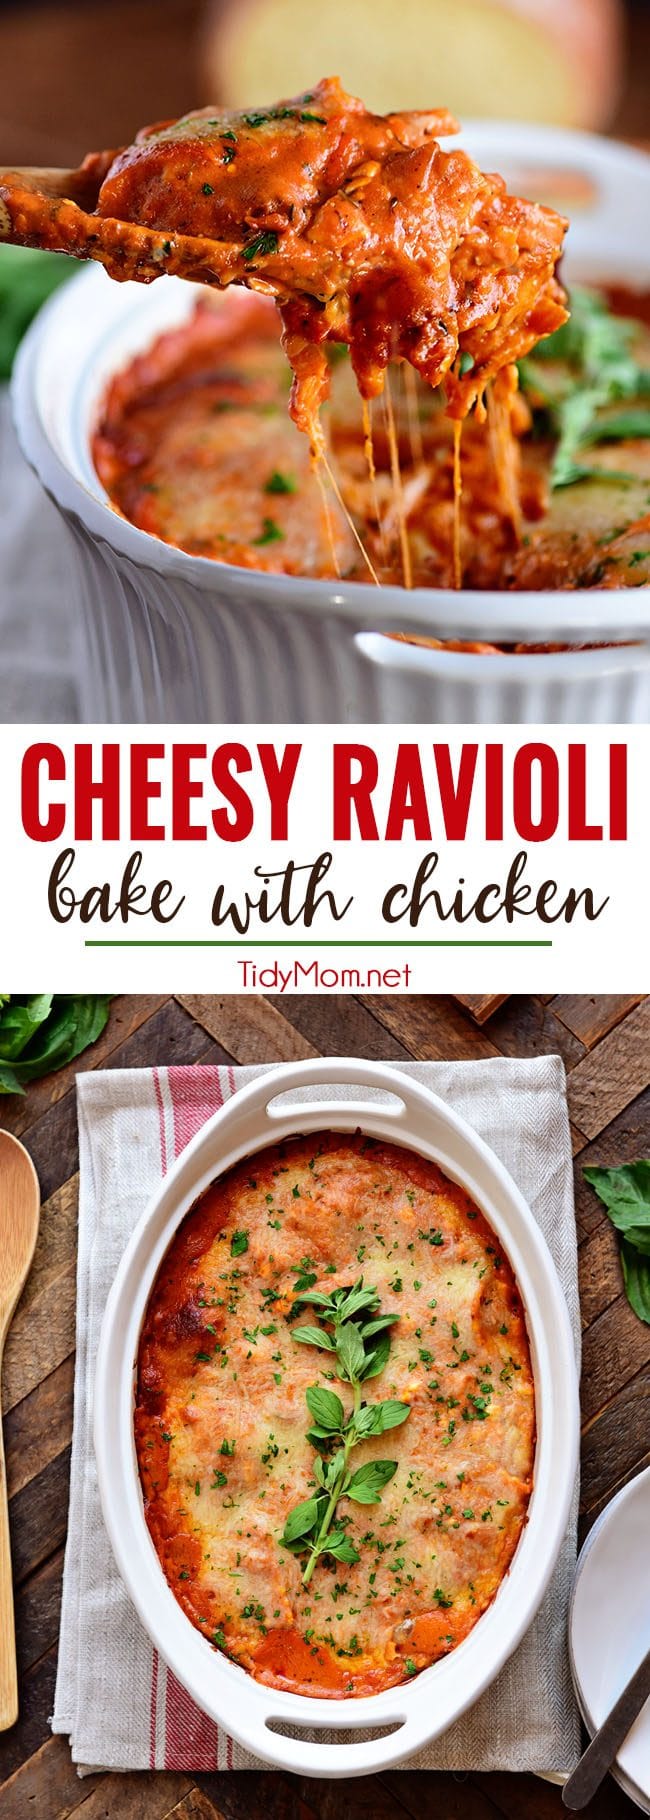 Cheesy Ravioli Bake with Chicken is easy to make and impossible to resist. Making it the perfect weeknight dish. Cheese ravioli, marinara sauce, chicken and lots of cheese, all layered and baked until bubbly and gooey! Print casserole recipe + view short recipe video at TidyMom.net